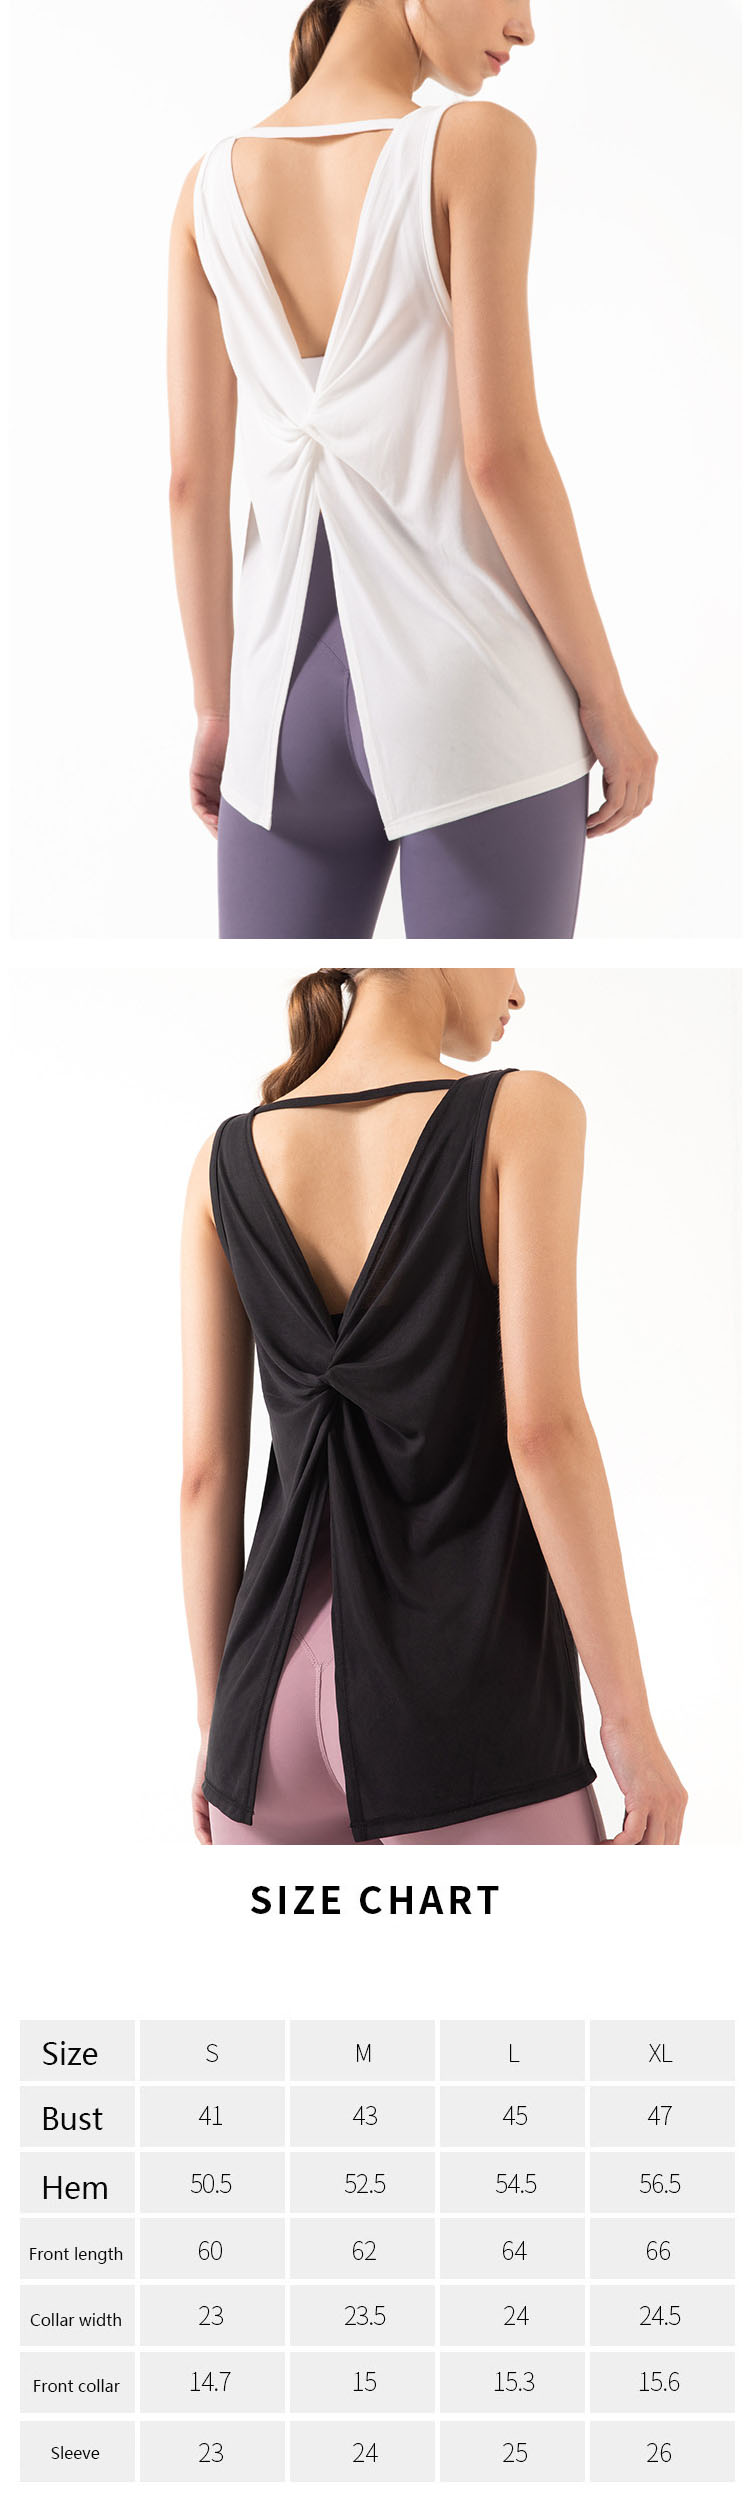 The typical two-piece split design of the back can be knotted at the hem to keep the air